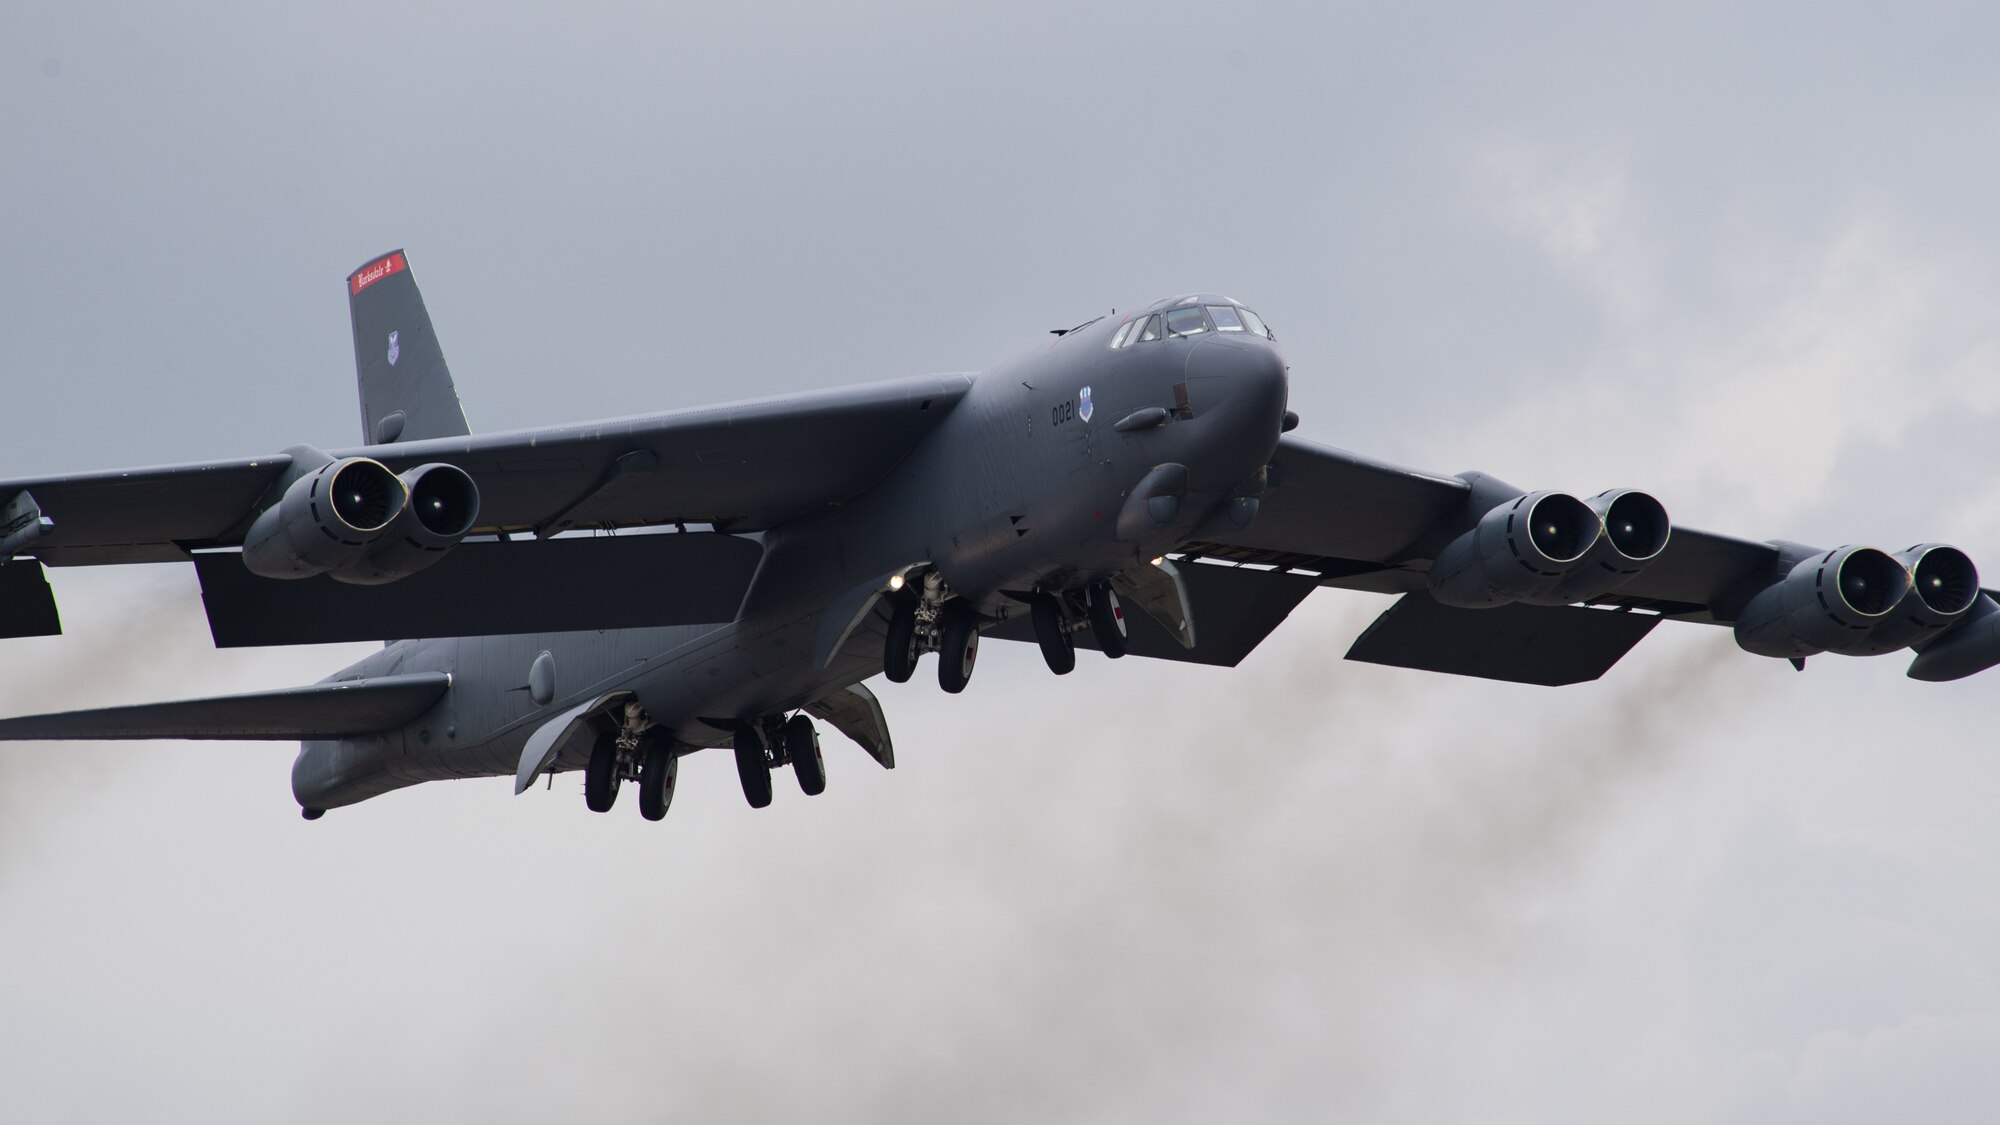 A B-52H Stratofortress takes off from Barksdale Air Force Base, La., during Global Thunder 21 Oct. 23, 2020. Exercises like GLOBAL THUNDER involve extensive planning and coordination to provide unique training opportunities for assigned units and forces. (U.S. Air Force photo by Senior Airman Tessa B. Corrick)